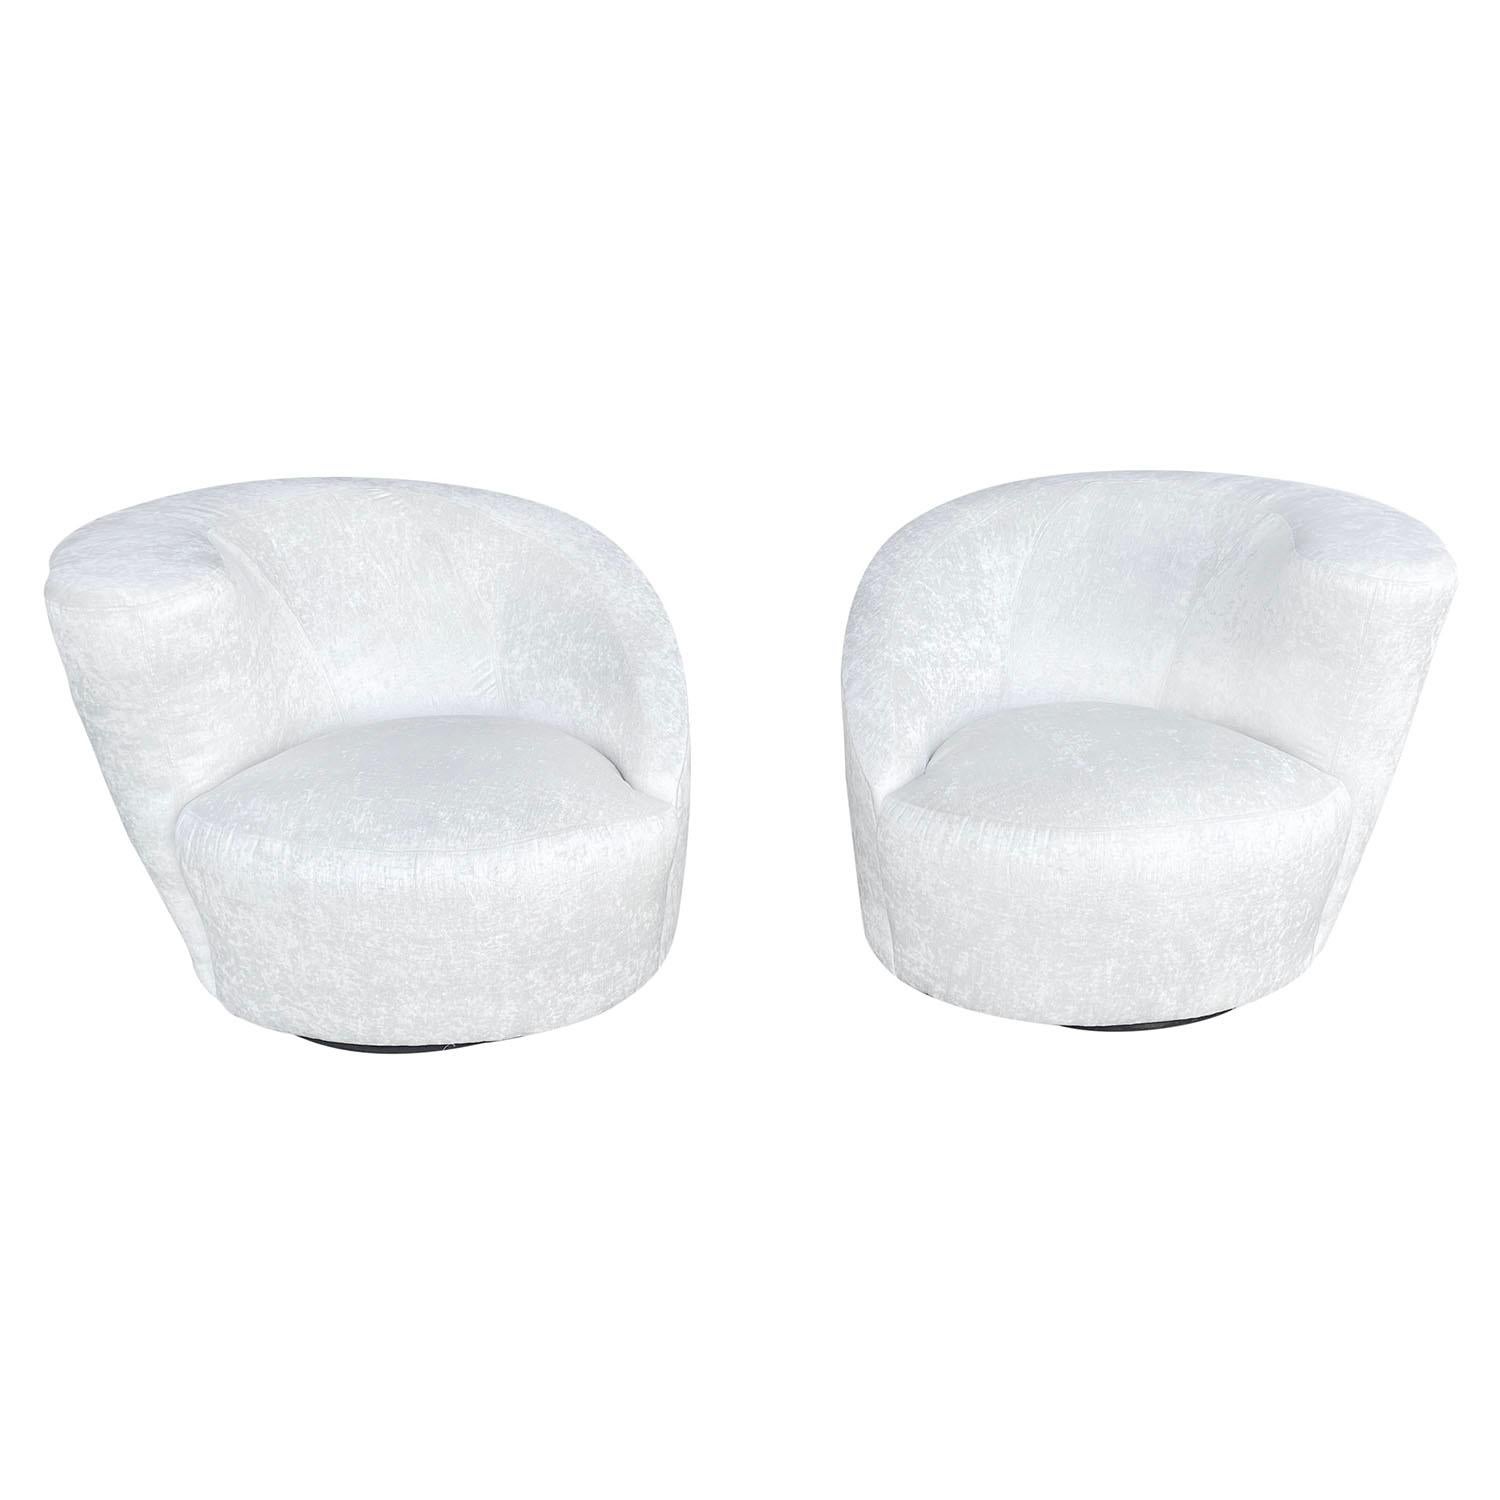 A round, vintage Mid-Century Modern American pair of swivel chairs, designed by Vladimir Kagan, in good condition. The high seat backrest of the lounge chairs are curved. Wear consistent with age and use, Circa 1950 - 1970, United States.

Seat: